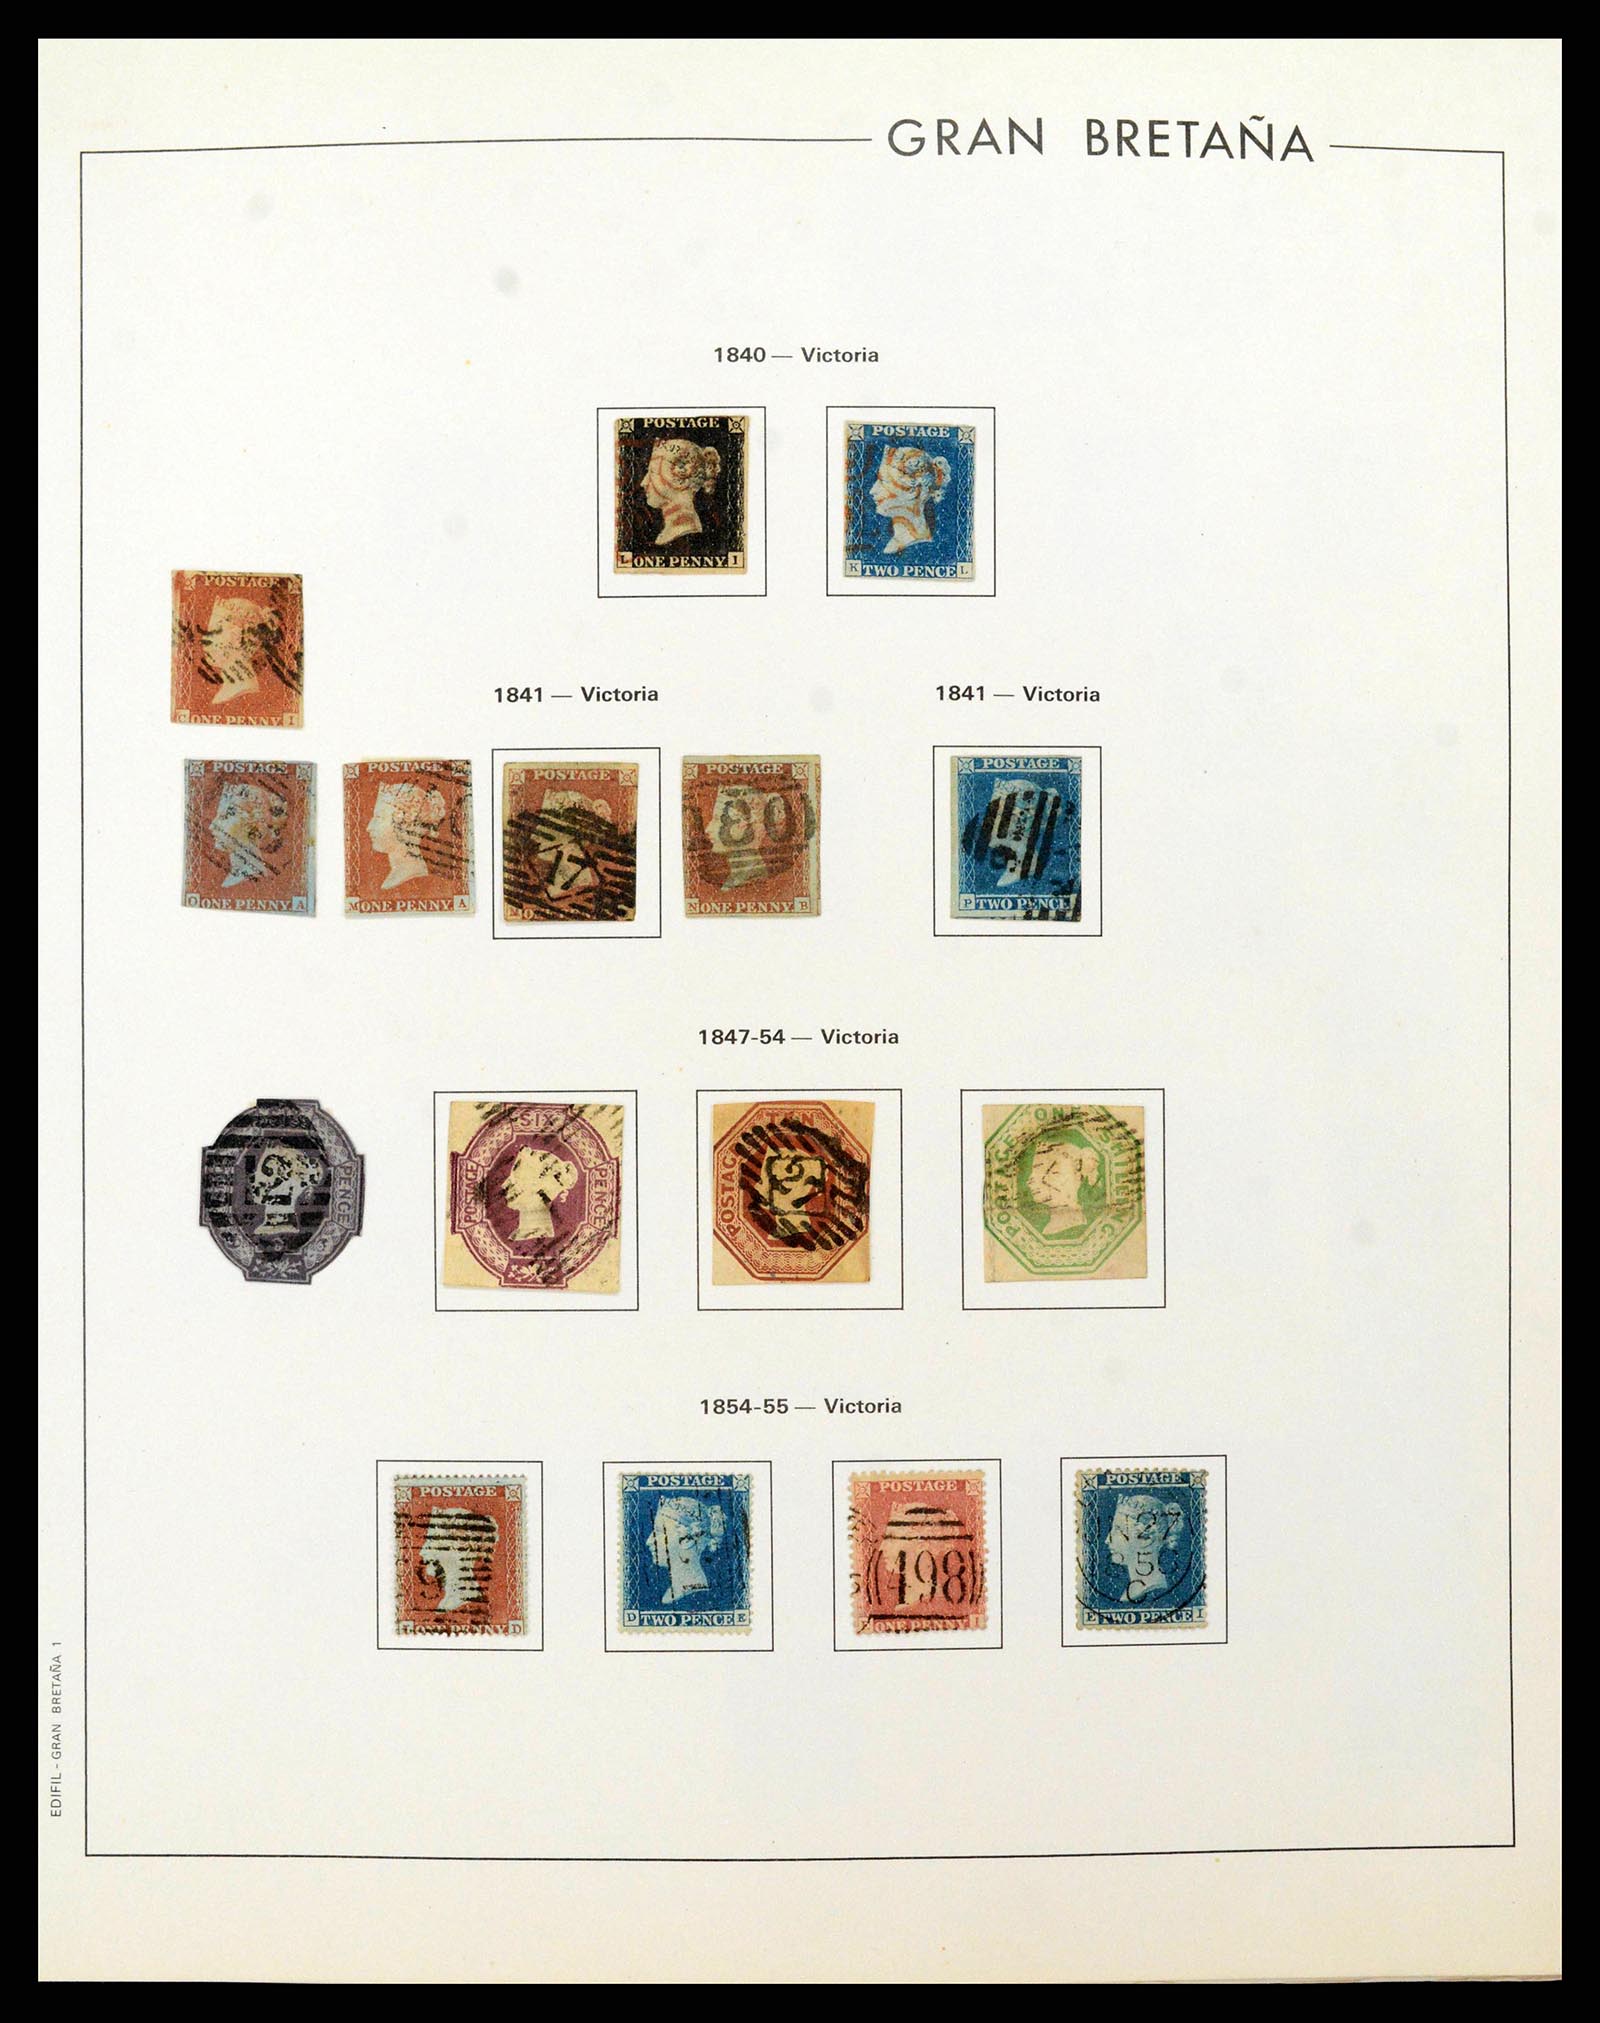 38924 0001 - Stamp collection 38924 Great Britain 1840-2000.